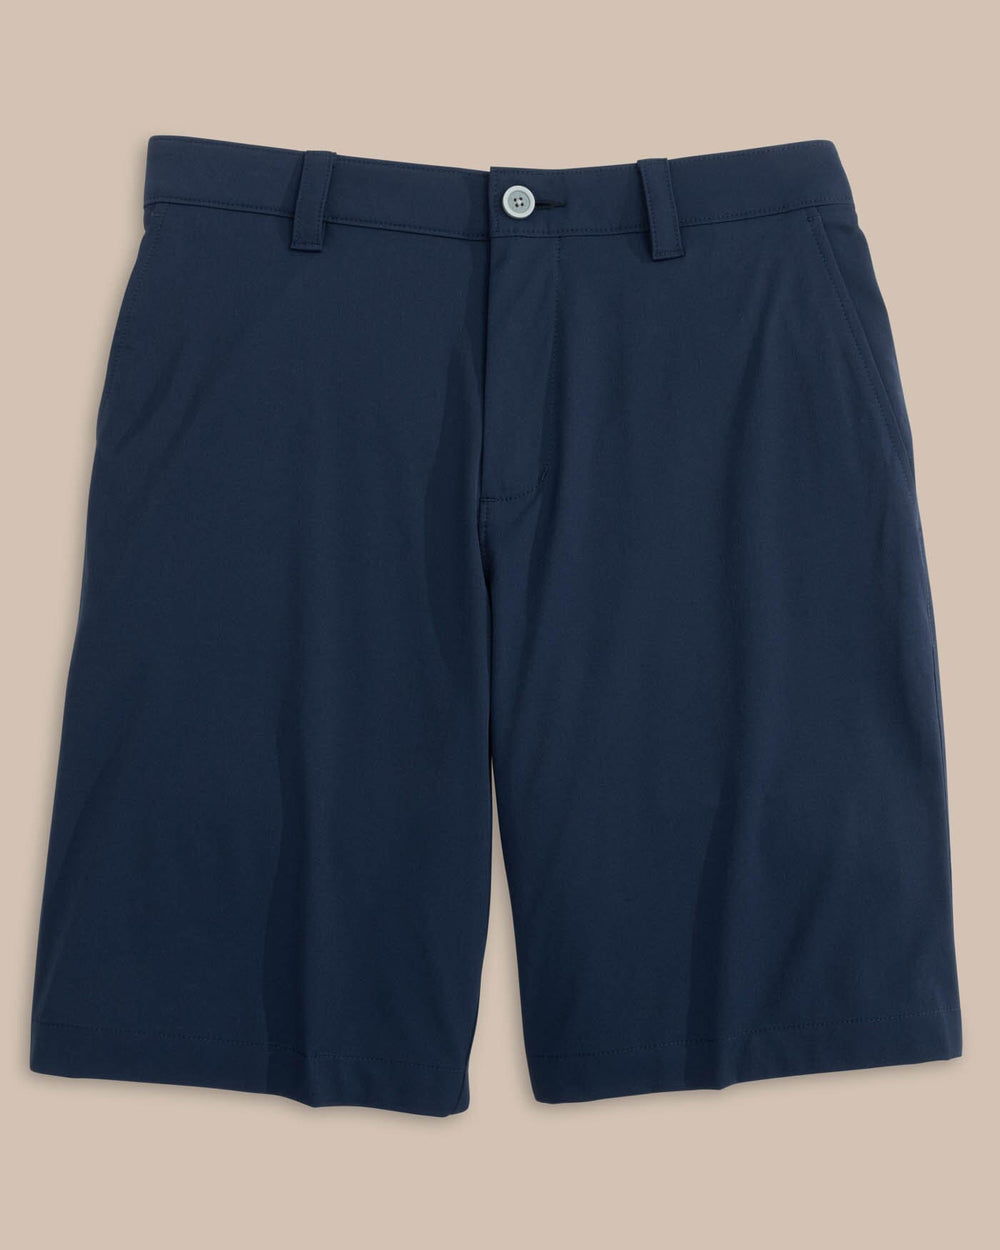 The front view of the Southern Tide brrr die 10 Short by Southern Tide - True Navy